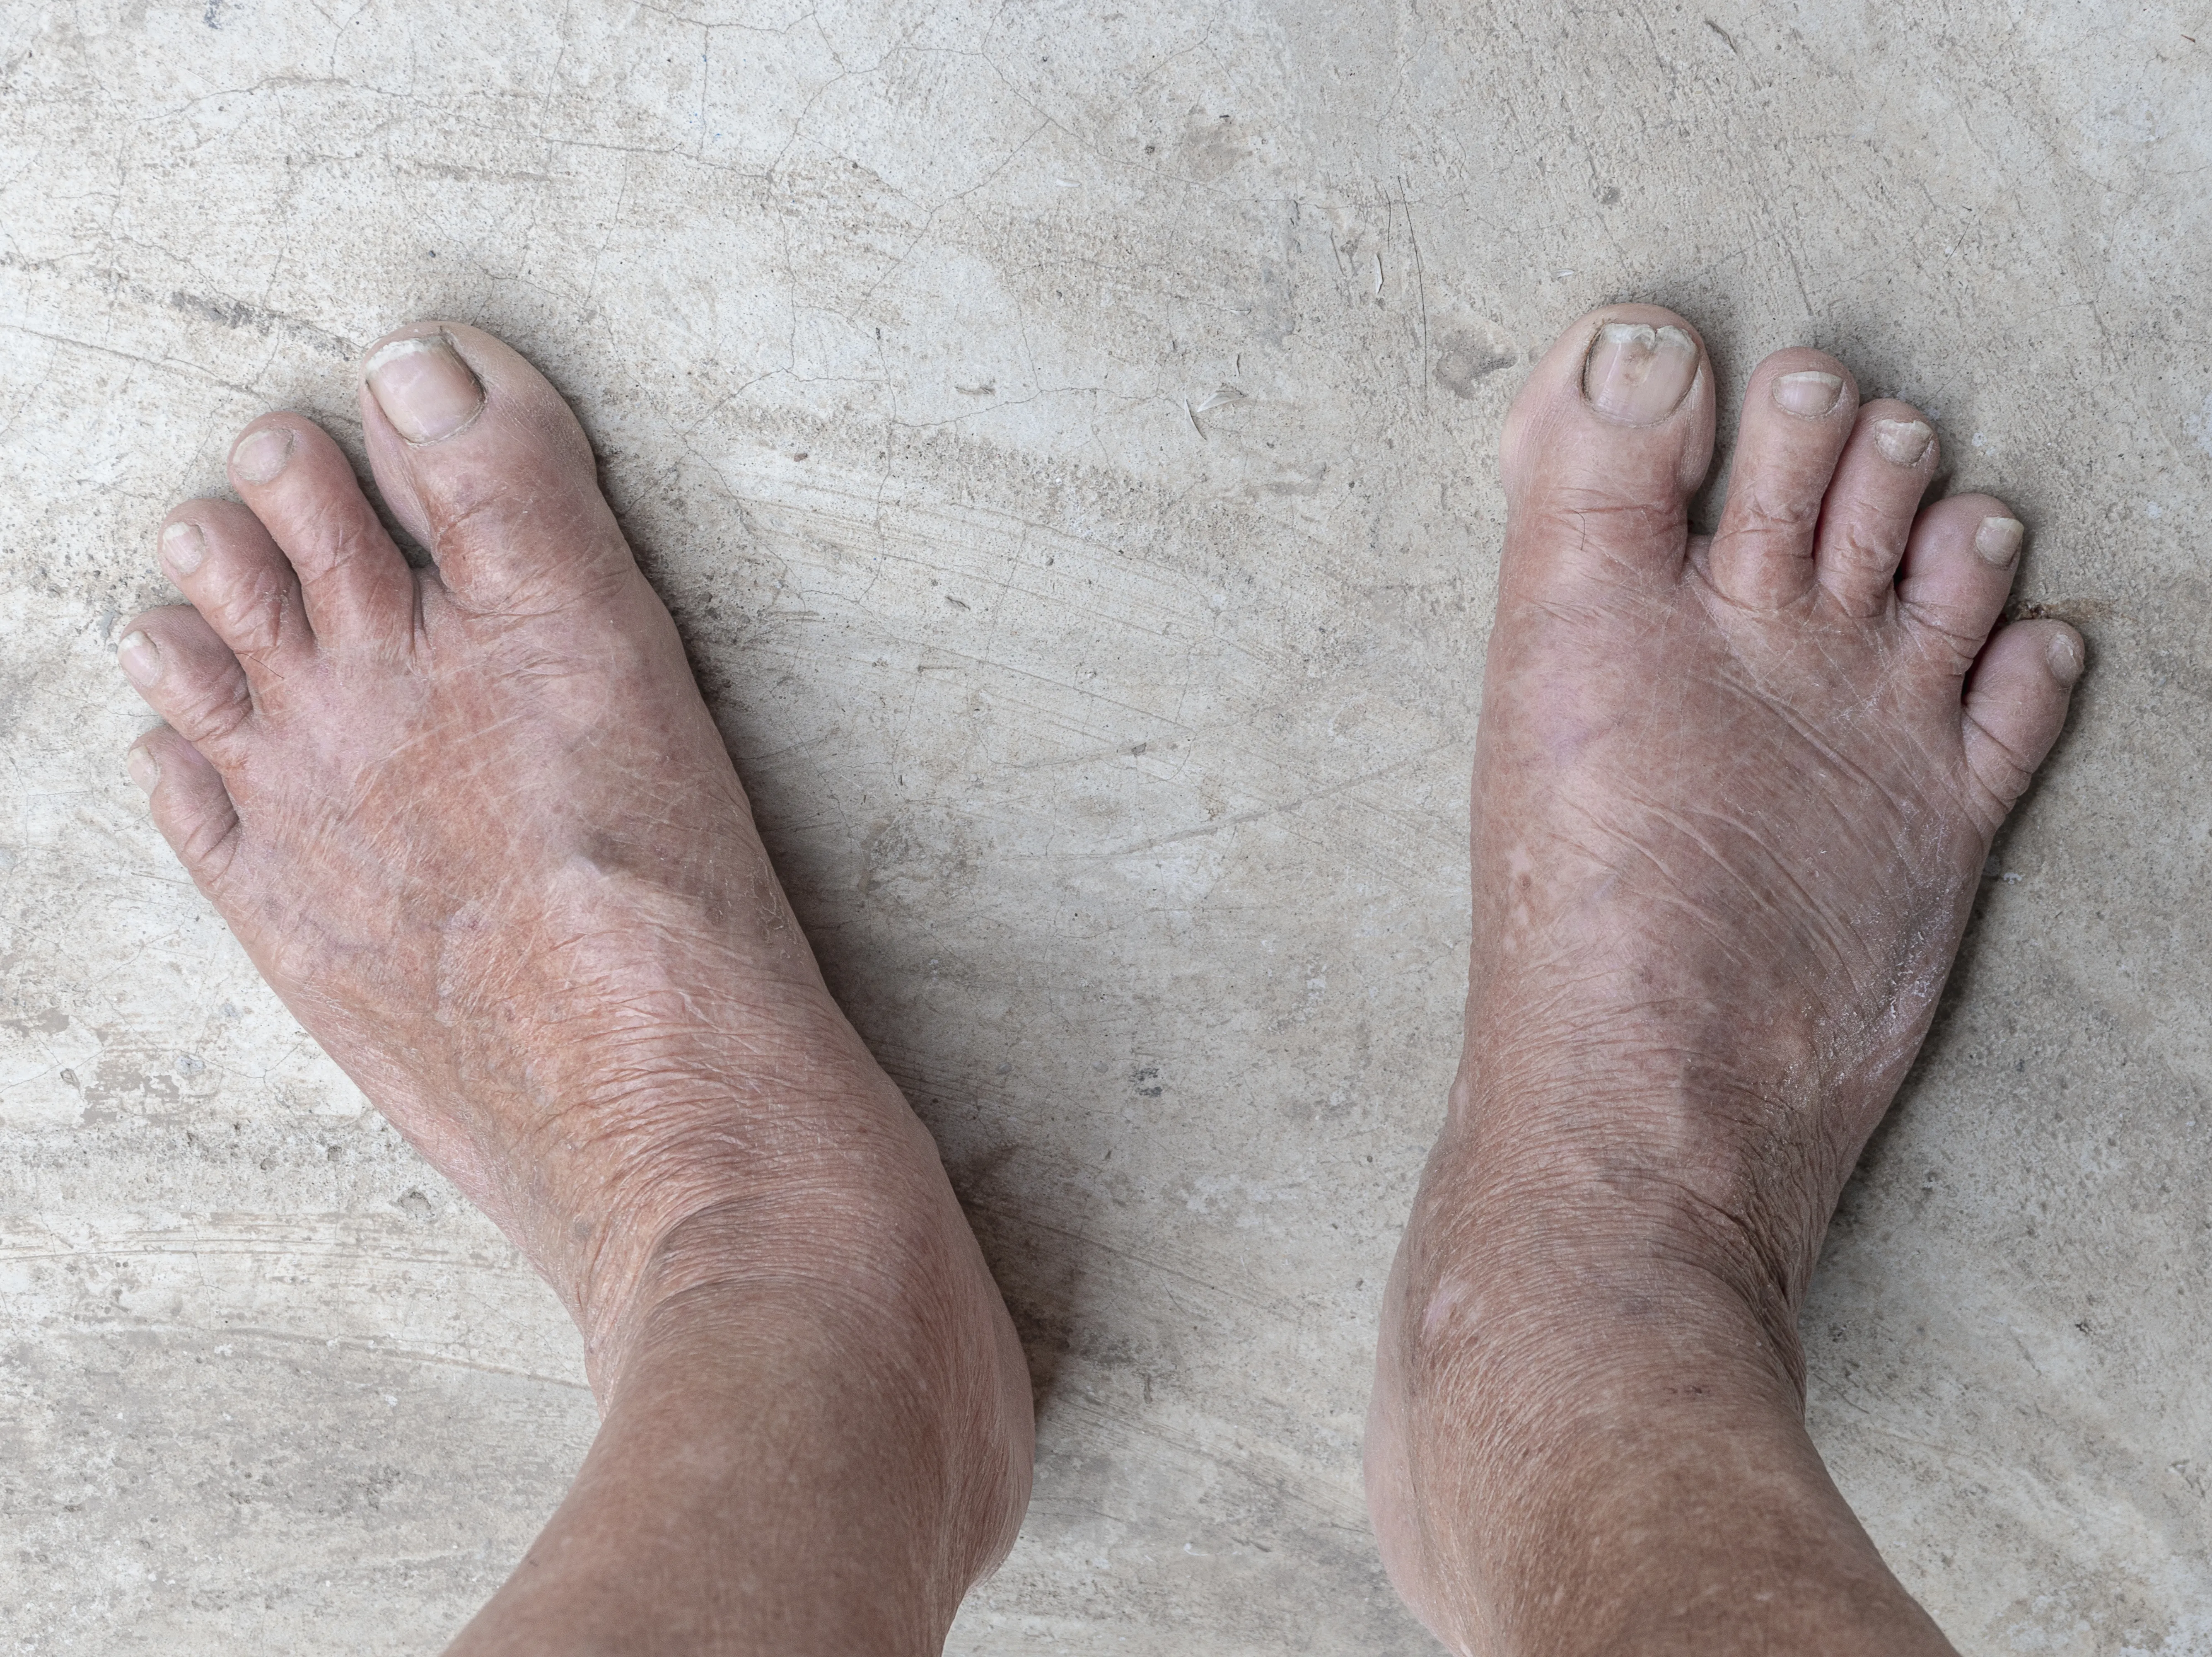 Diabetes Swollen Feet: Causes And Treatments